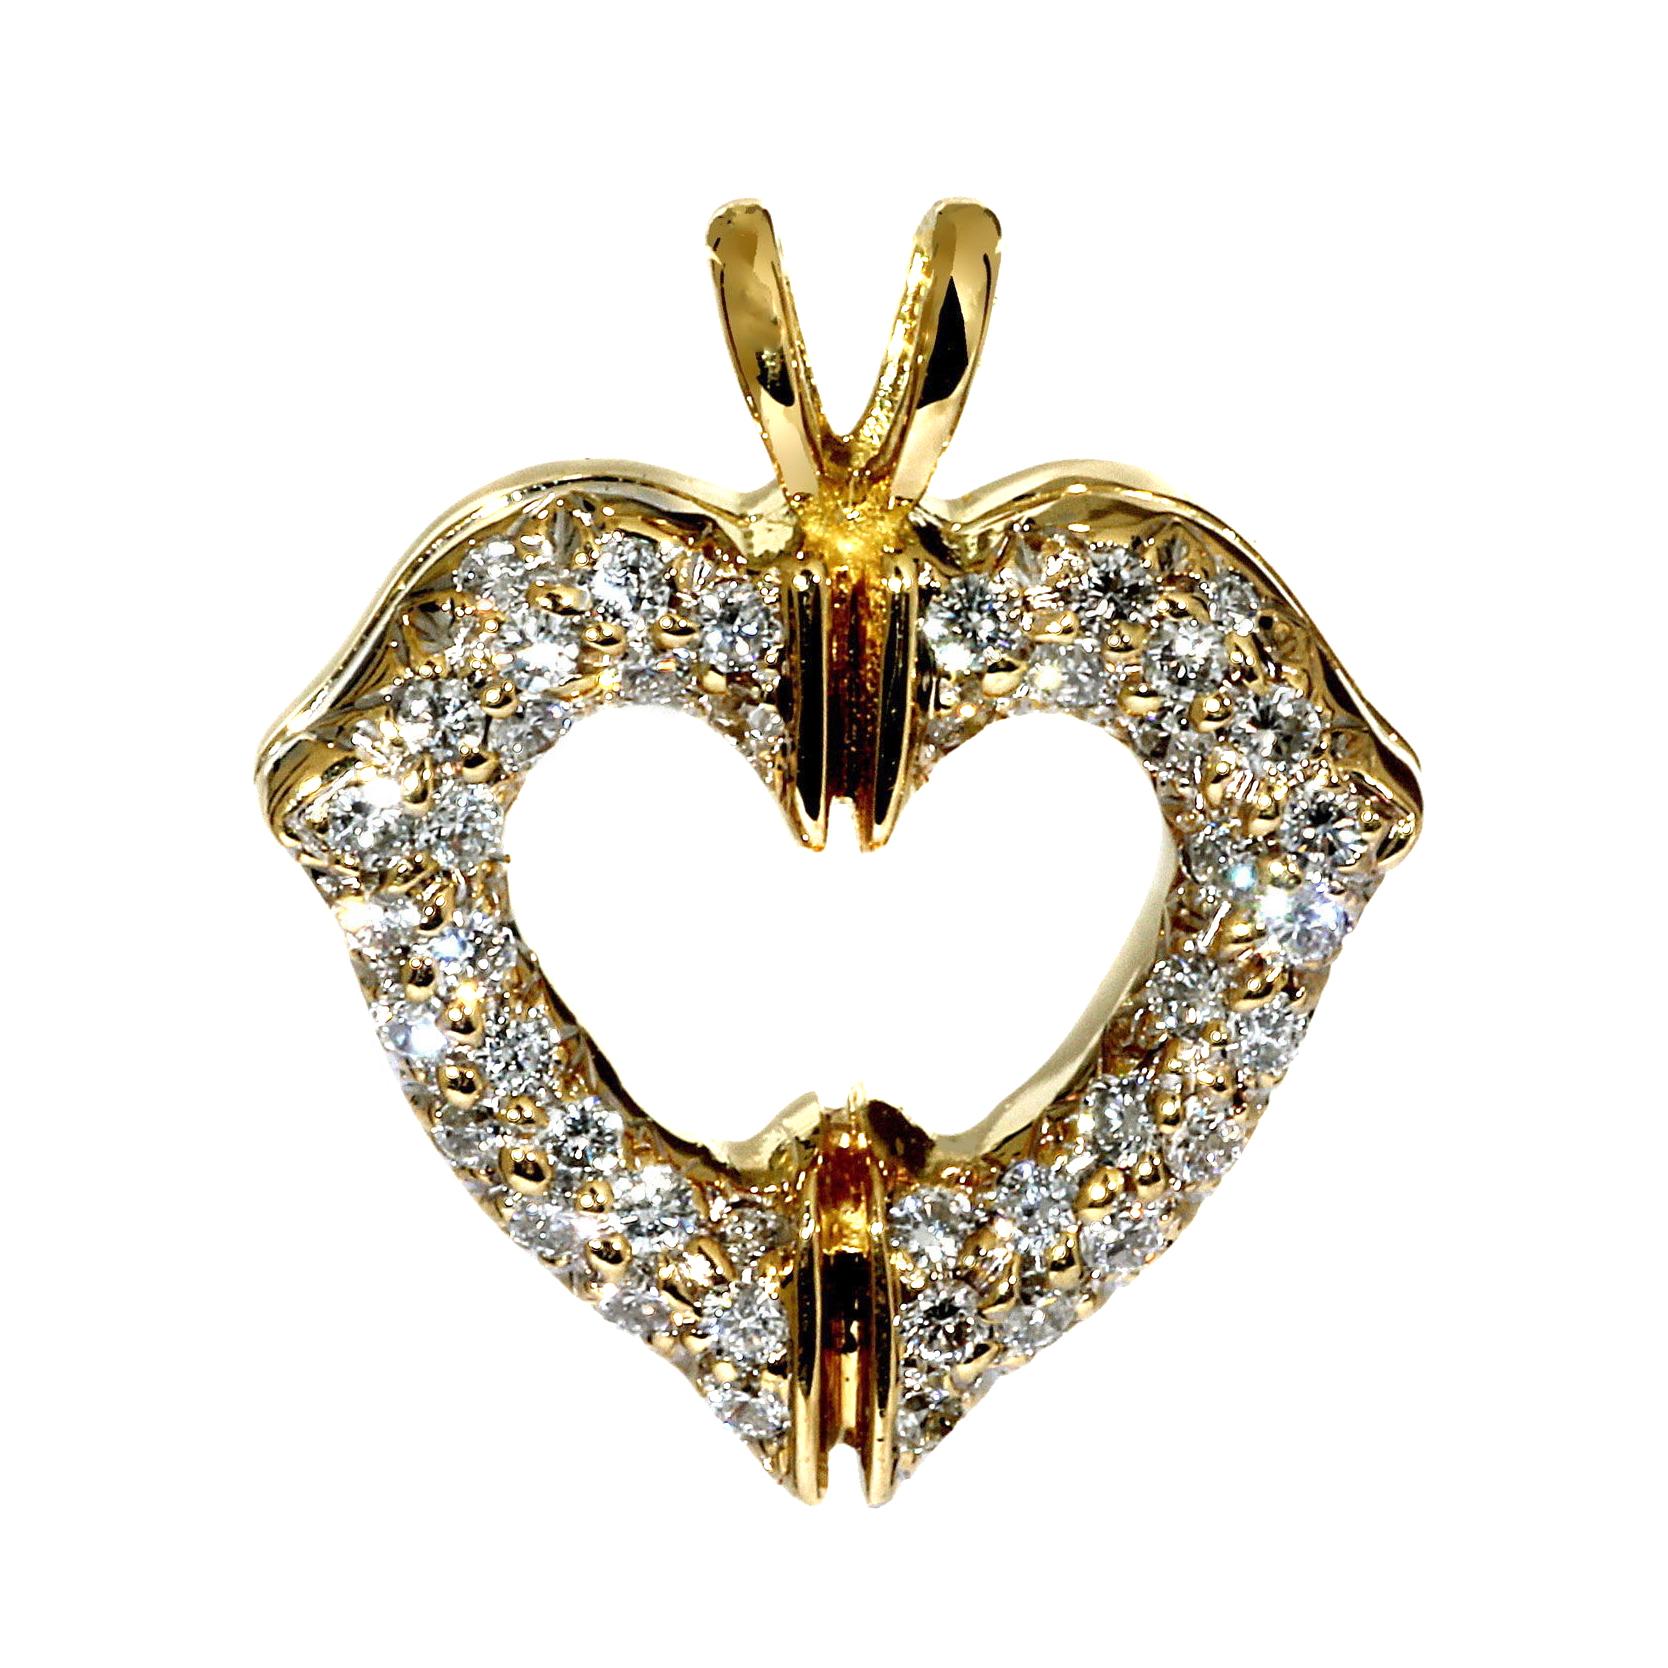 A lovely authentic Cartier heart diamond pendant set with the finest Cartier round brilliant cut diamonds in 18k yellow gold.

Dimensions: 17mm wide (.67″ Inches) by 19mm (.75″ Inches) in length

Inventory ID: 0000117